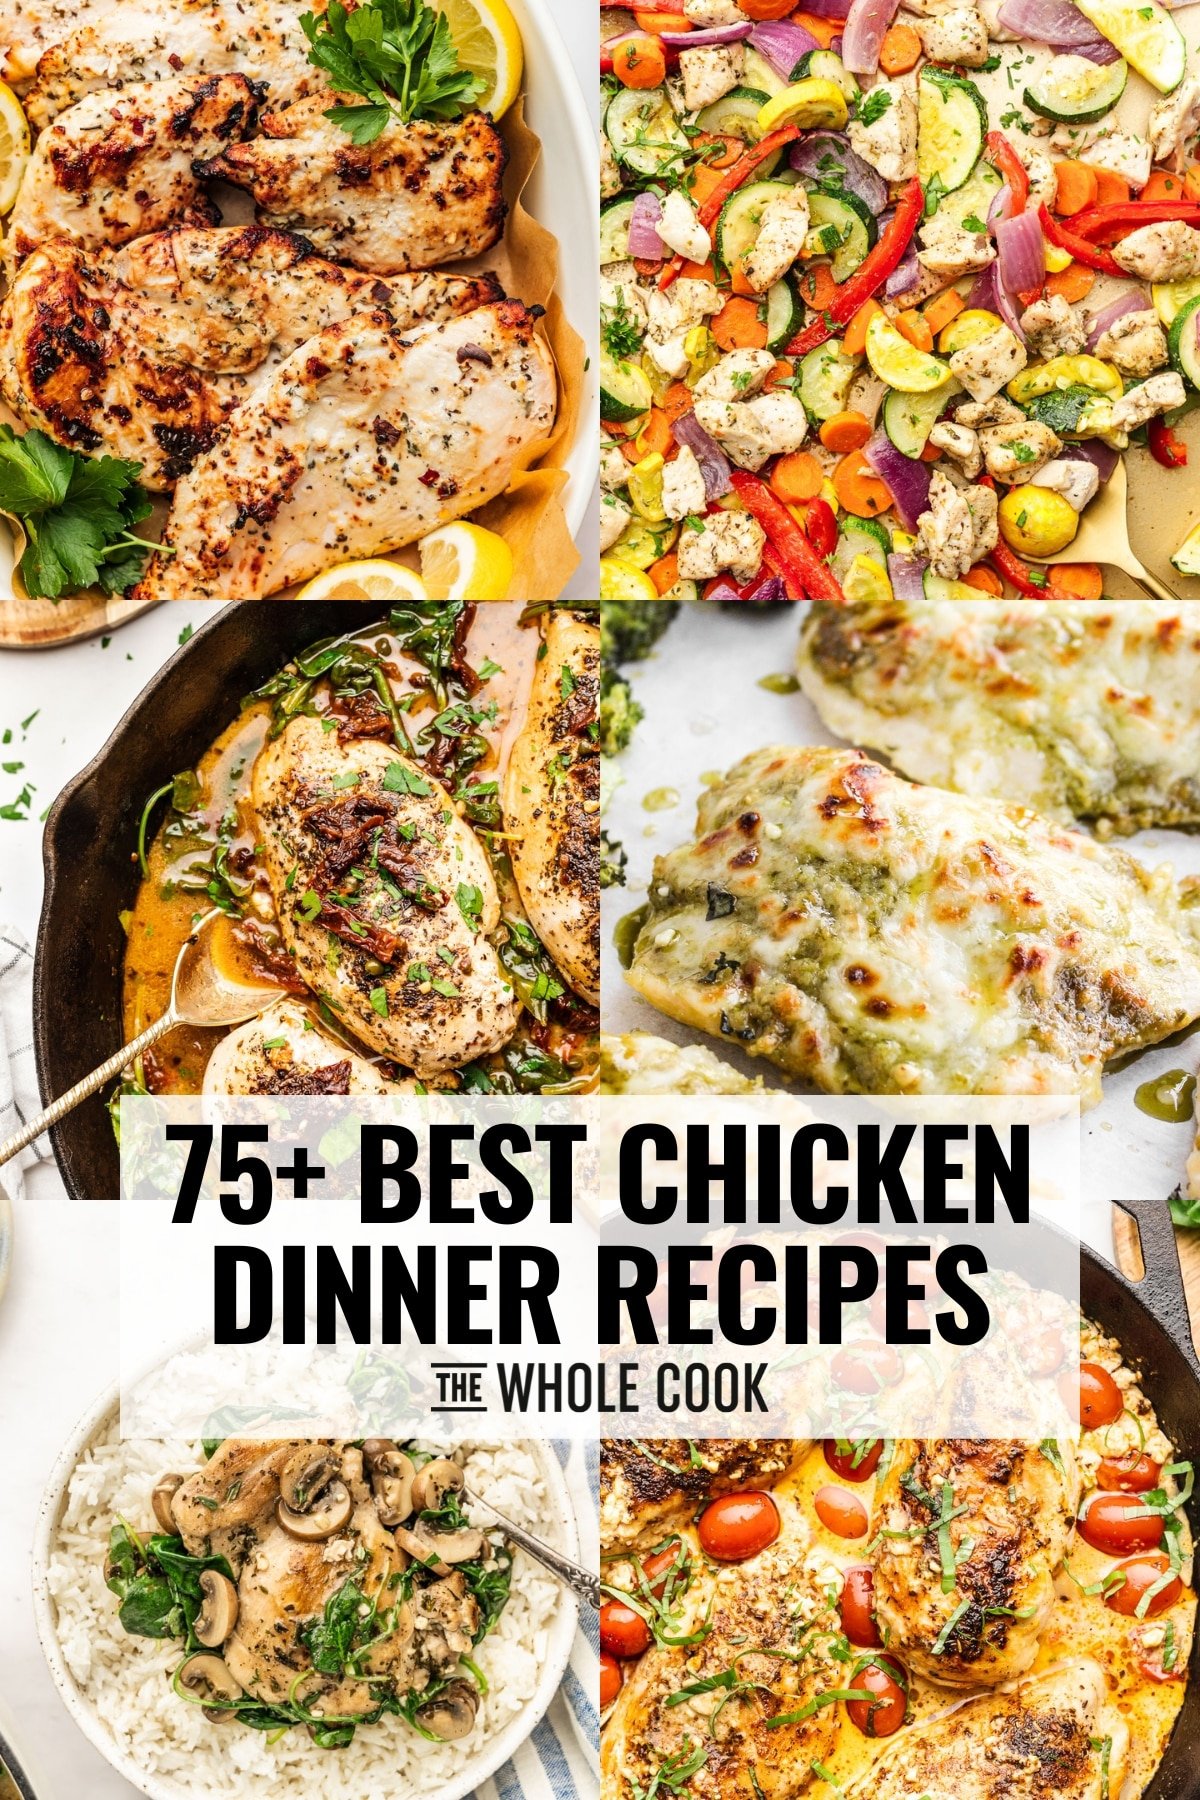 https://thewholecook.com/wp-content/uploads/2023/09/75-Best-Chicken-Dinner-Recipes-by-The-Whole-Cook-vertical.jpg